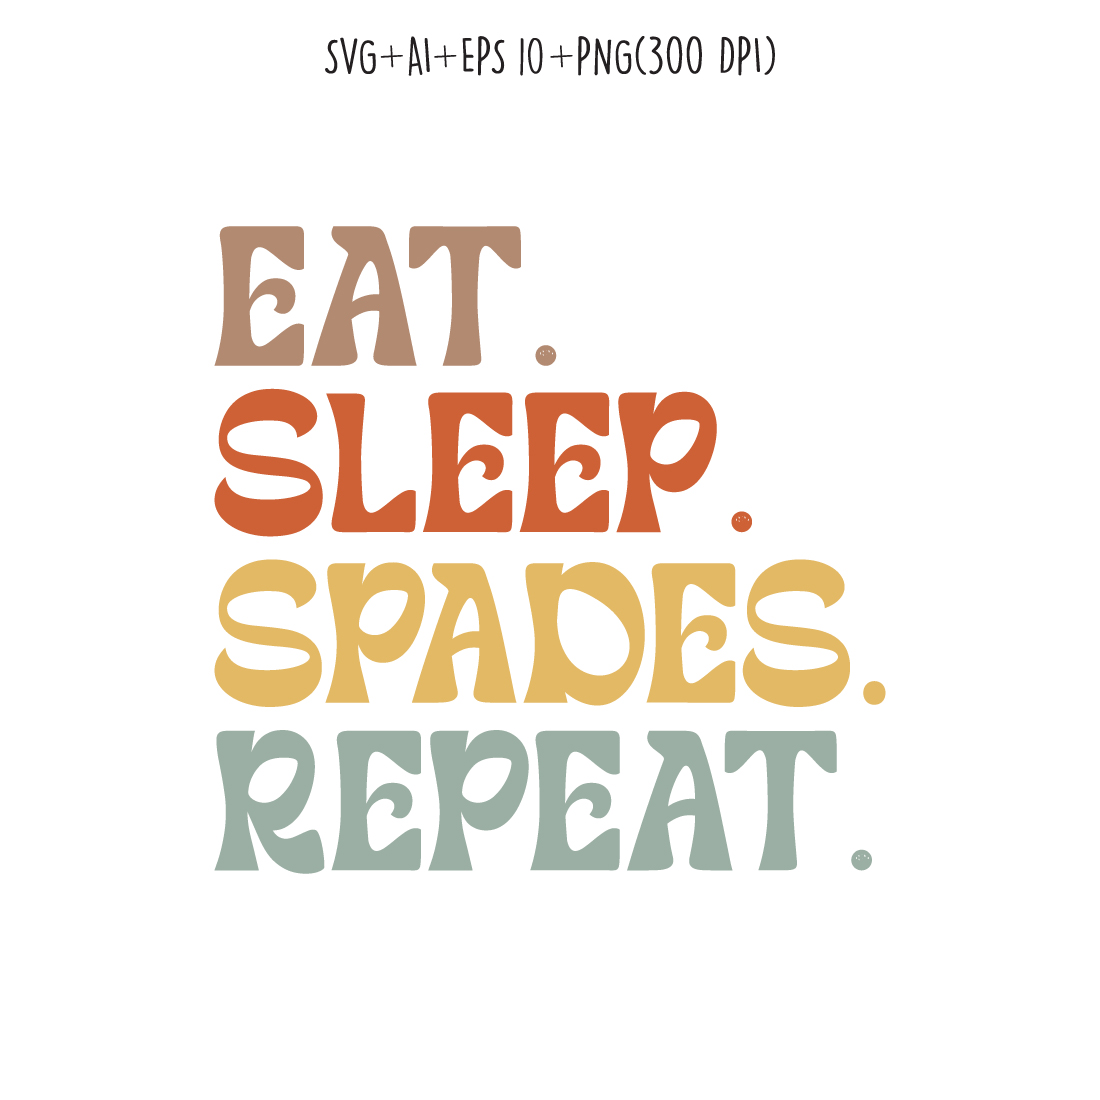 Eat Sleep Spades Repeat indoor game typography design for t-shirts, cards, frame artwork, phone cases, bags, mugs, stickers, tumblers, print, etc cover image.